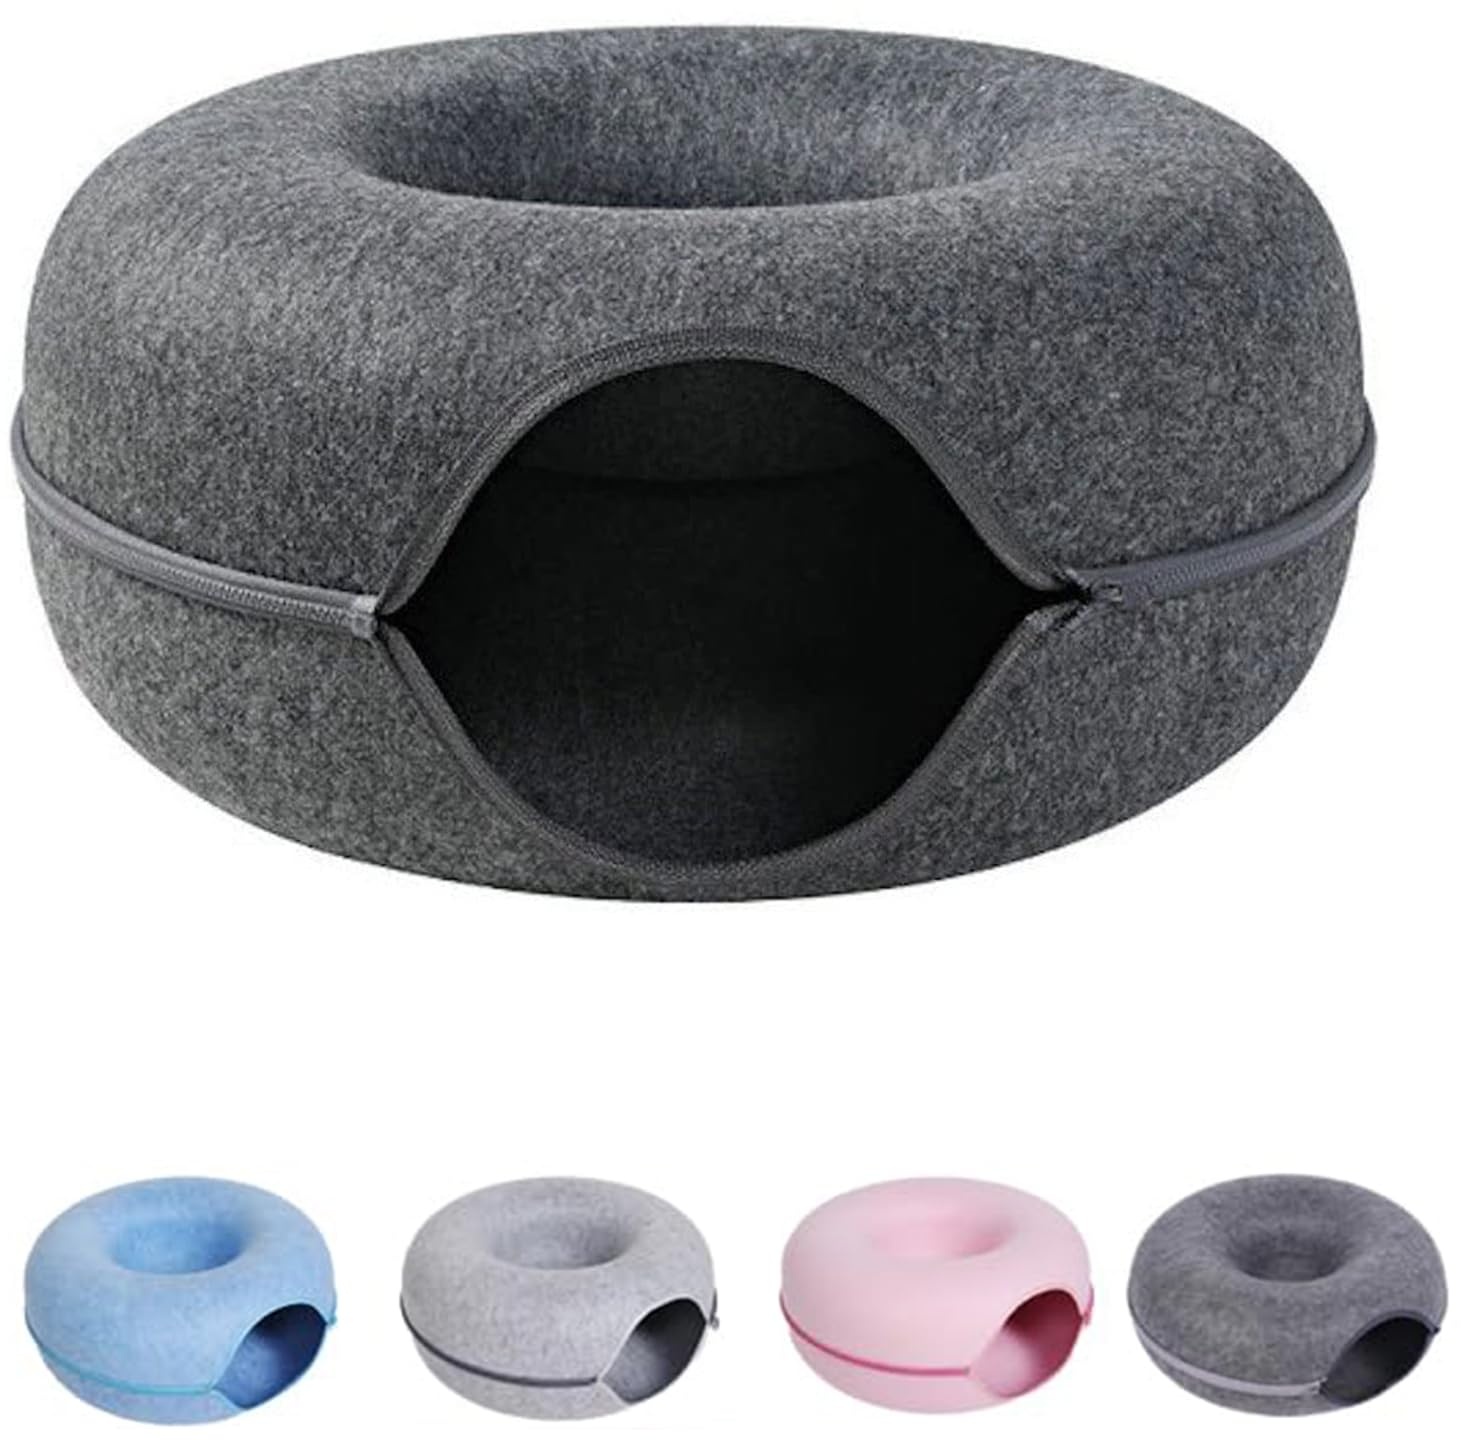 Meowmaze Cat Bed, Meow Maze Tunnel Bed, Round Felt Cat Tunnel Removable Cat Nest Bed, Washable Interior Cat Play Tunnel for About 9 Lbs Small Pets (S,Dark Gray)